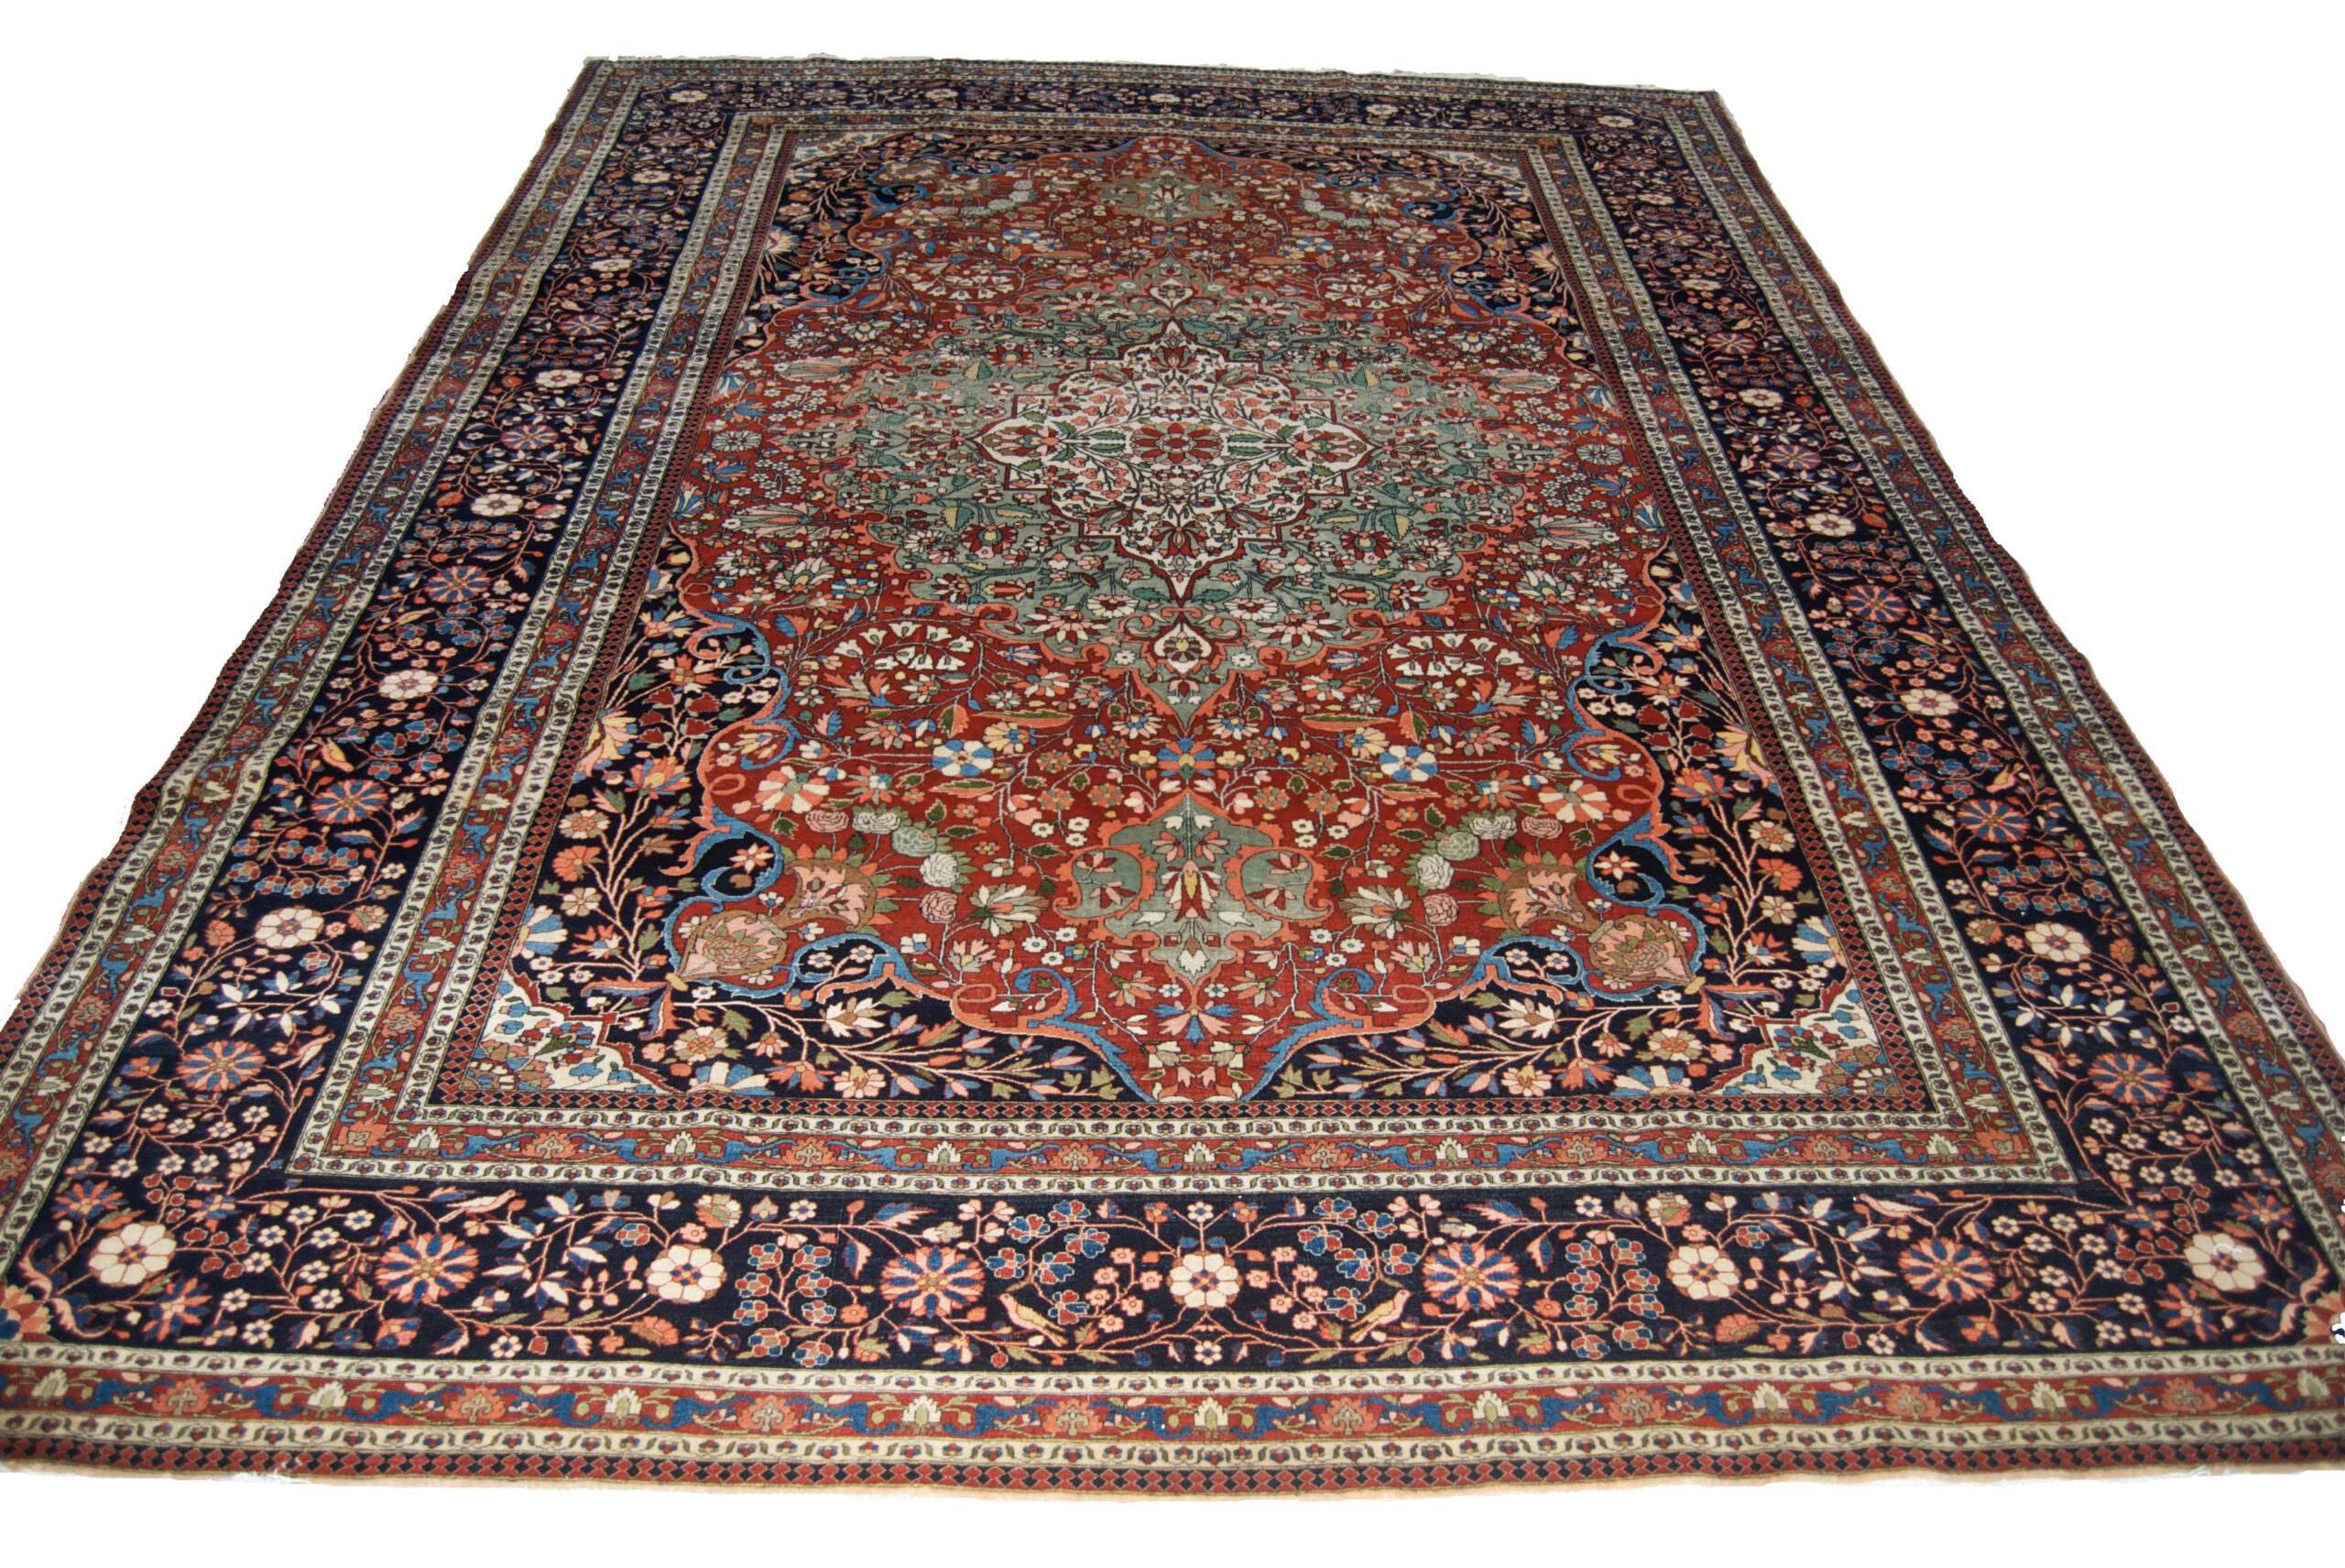 Antique Persian Mohtasham Kashan carpet with a green medallion on a brick red field with navy corner spandrels and a navy blue border, Douglas Stock Gallery, antique Persian carpets, antique Oriental rugs Boston,MA area